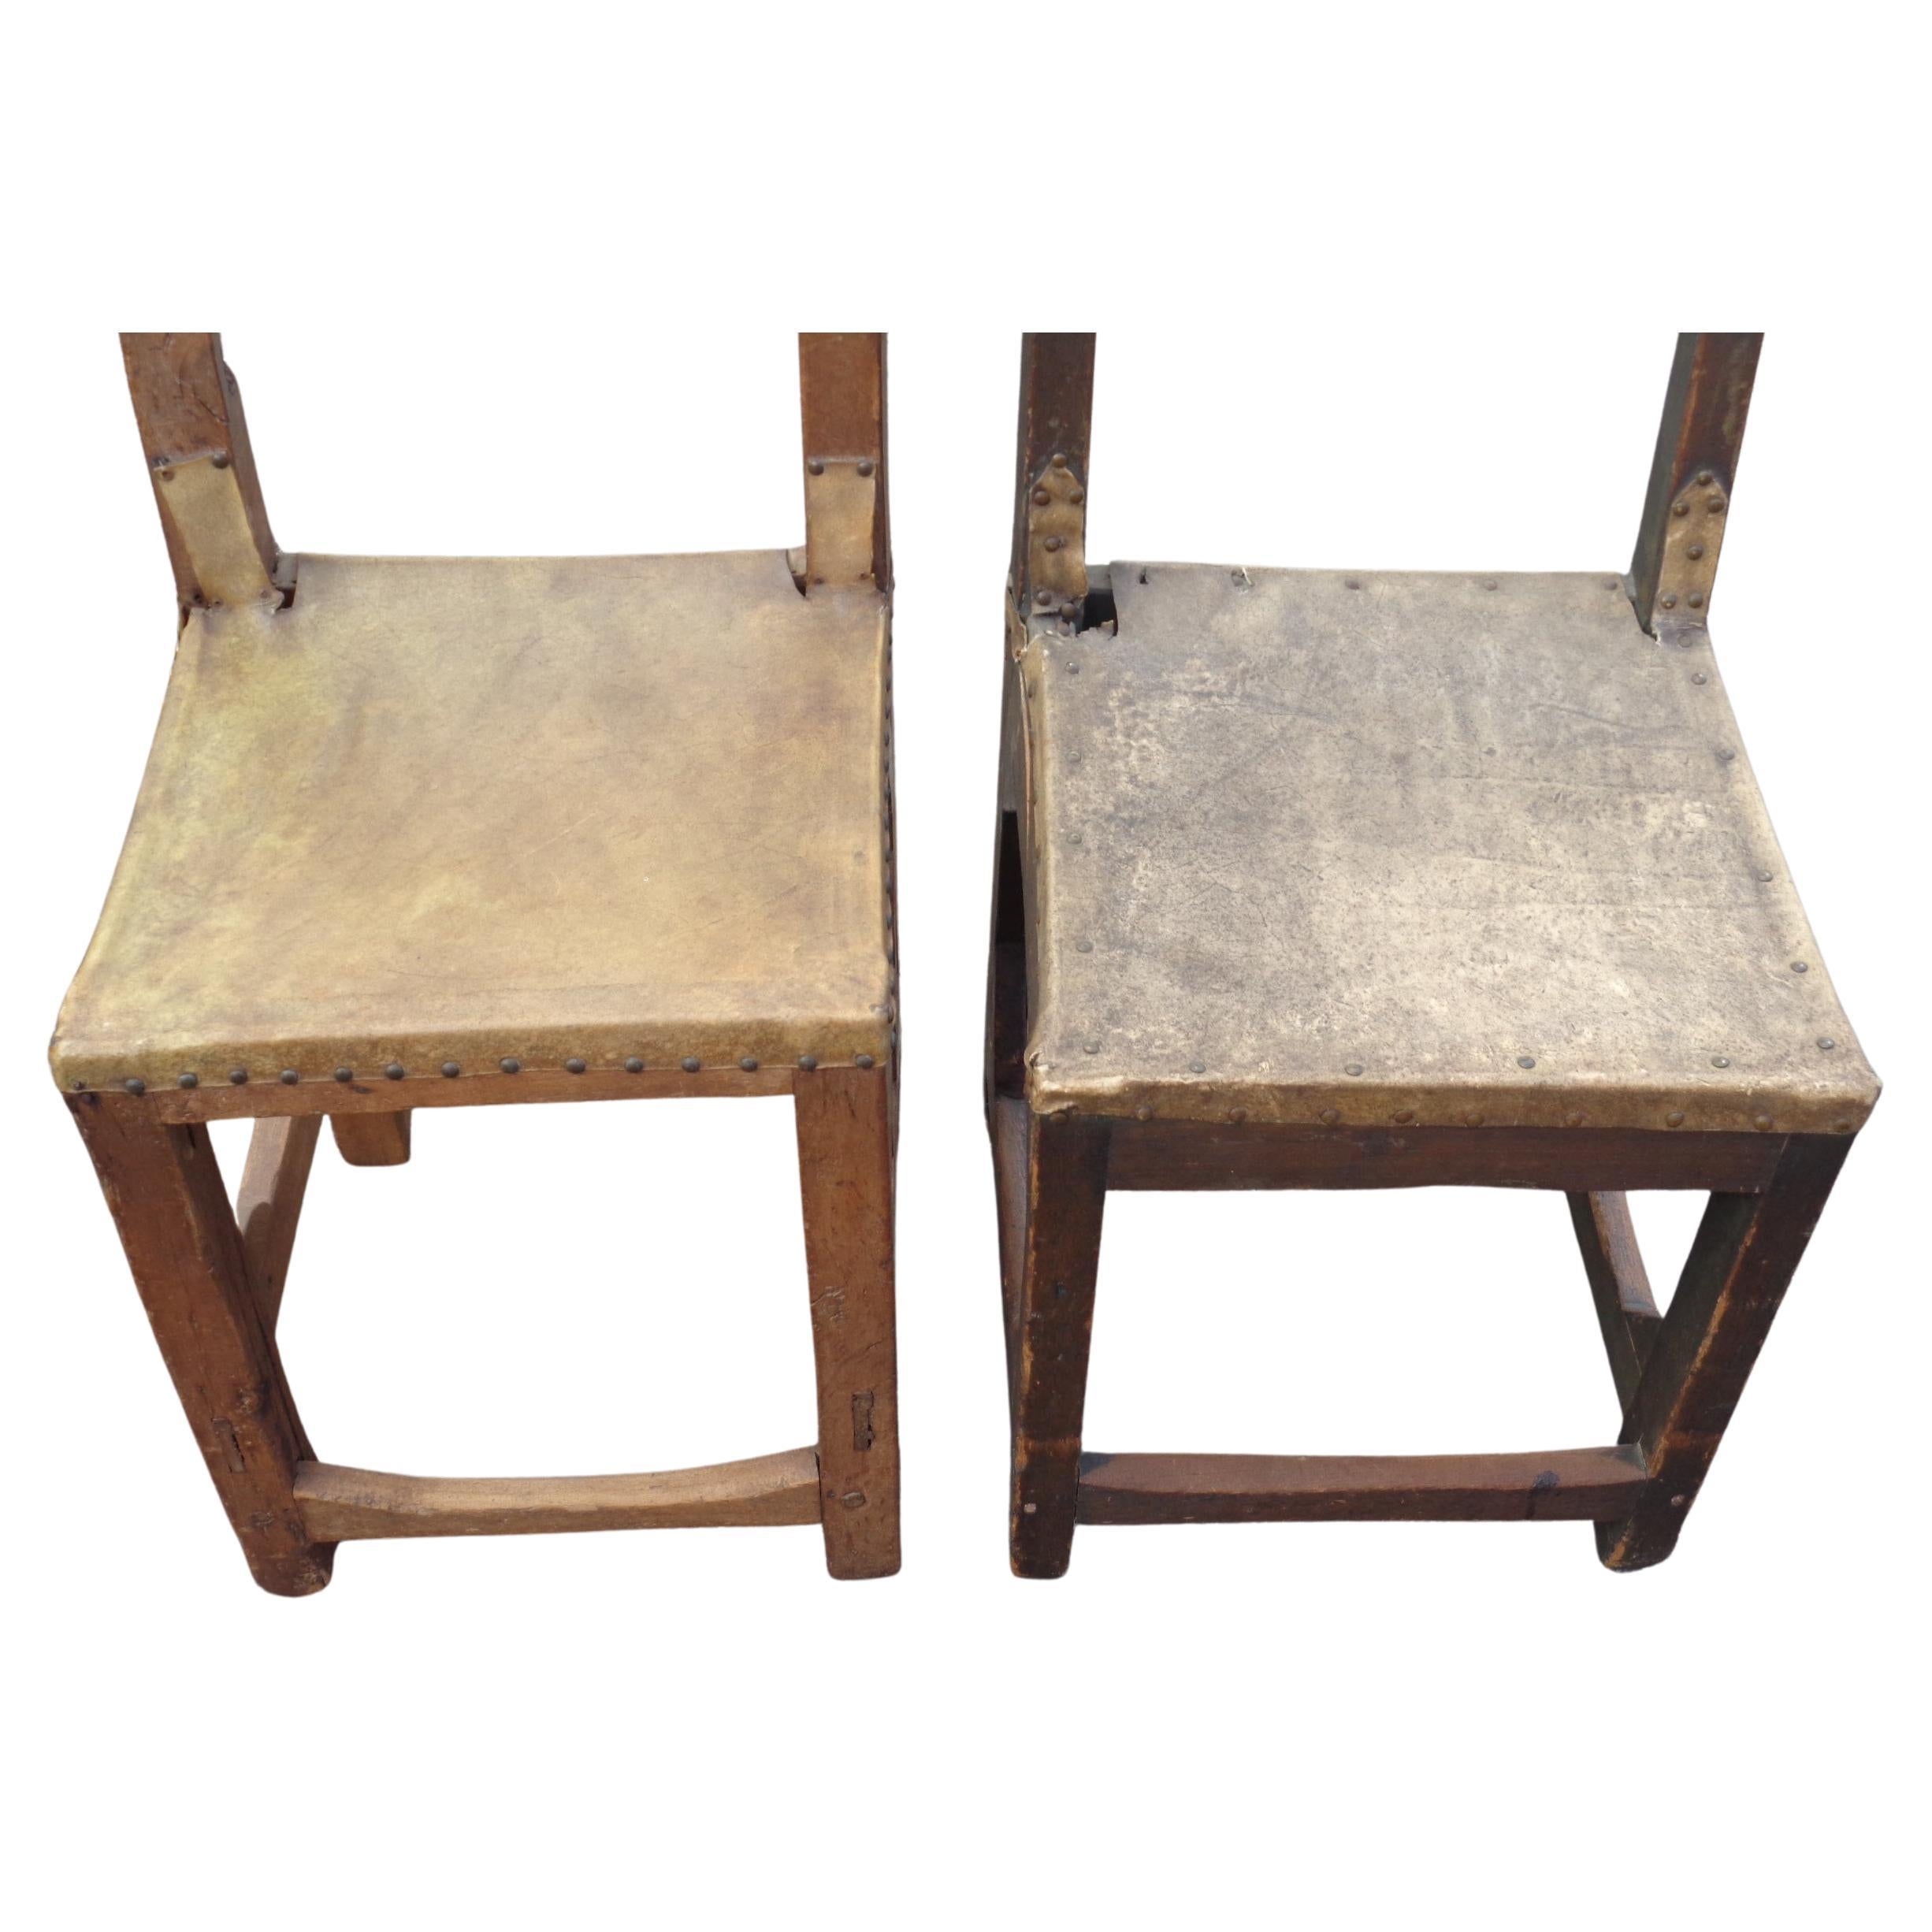 Unknown Antique Spanish Colonial Chairs w/ Vellum Hide Seats Backs